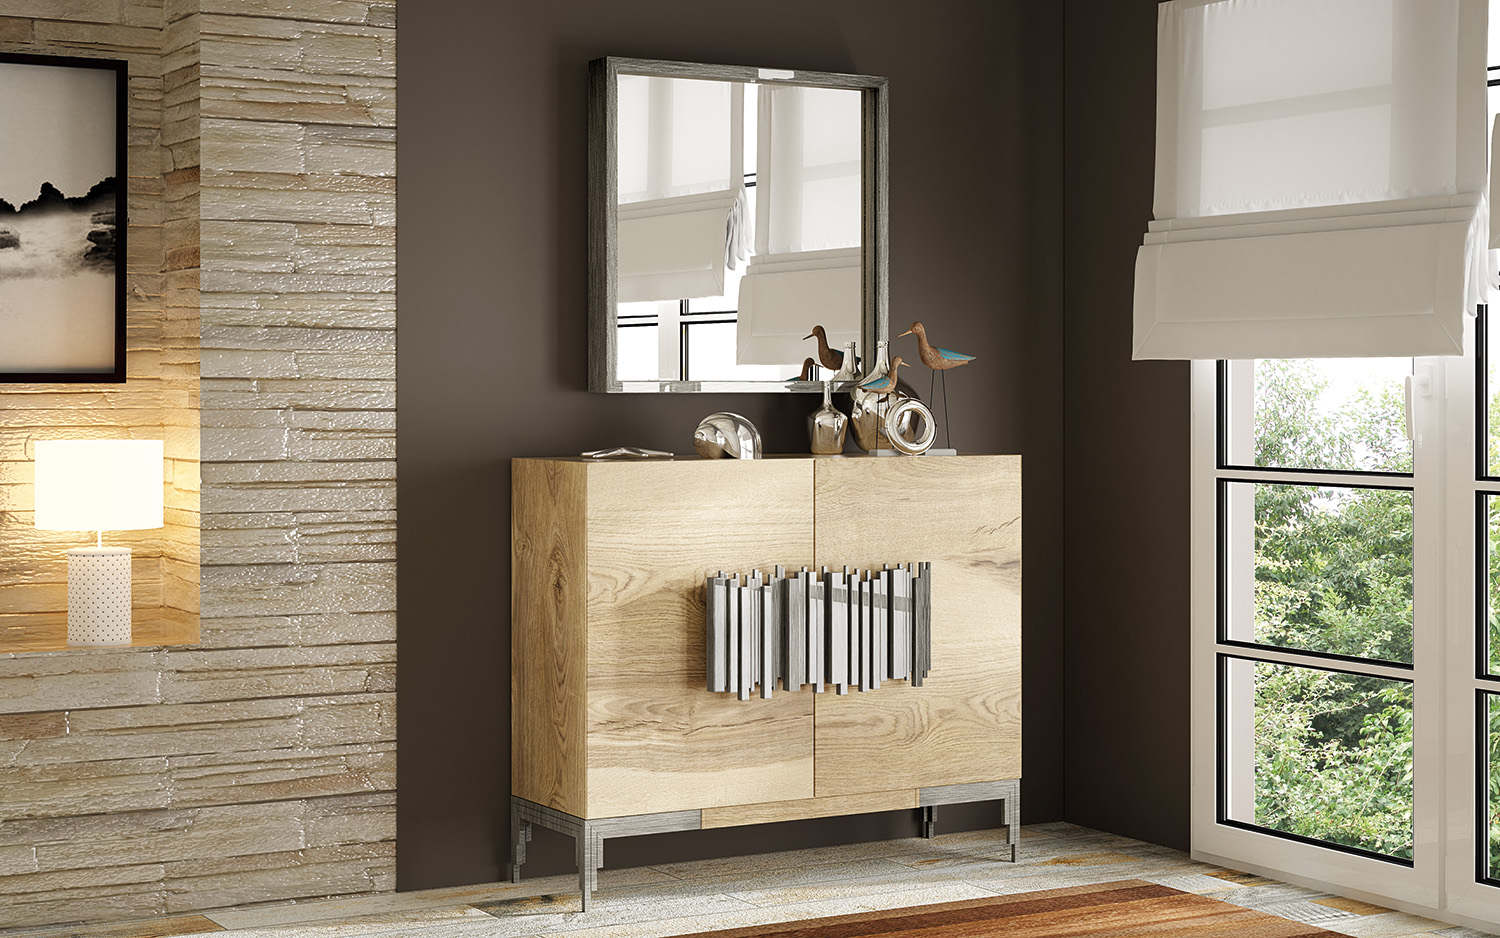 Brands Franco Kora Dining and Wall Units, Spain ZII.02 SHOE CABINET